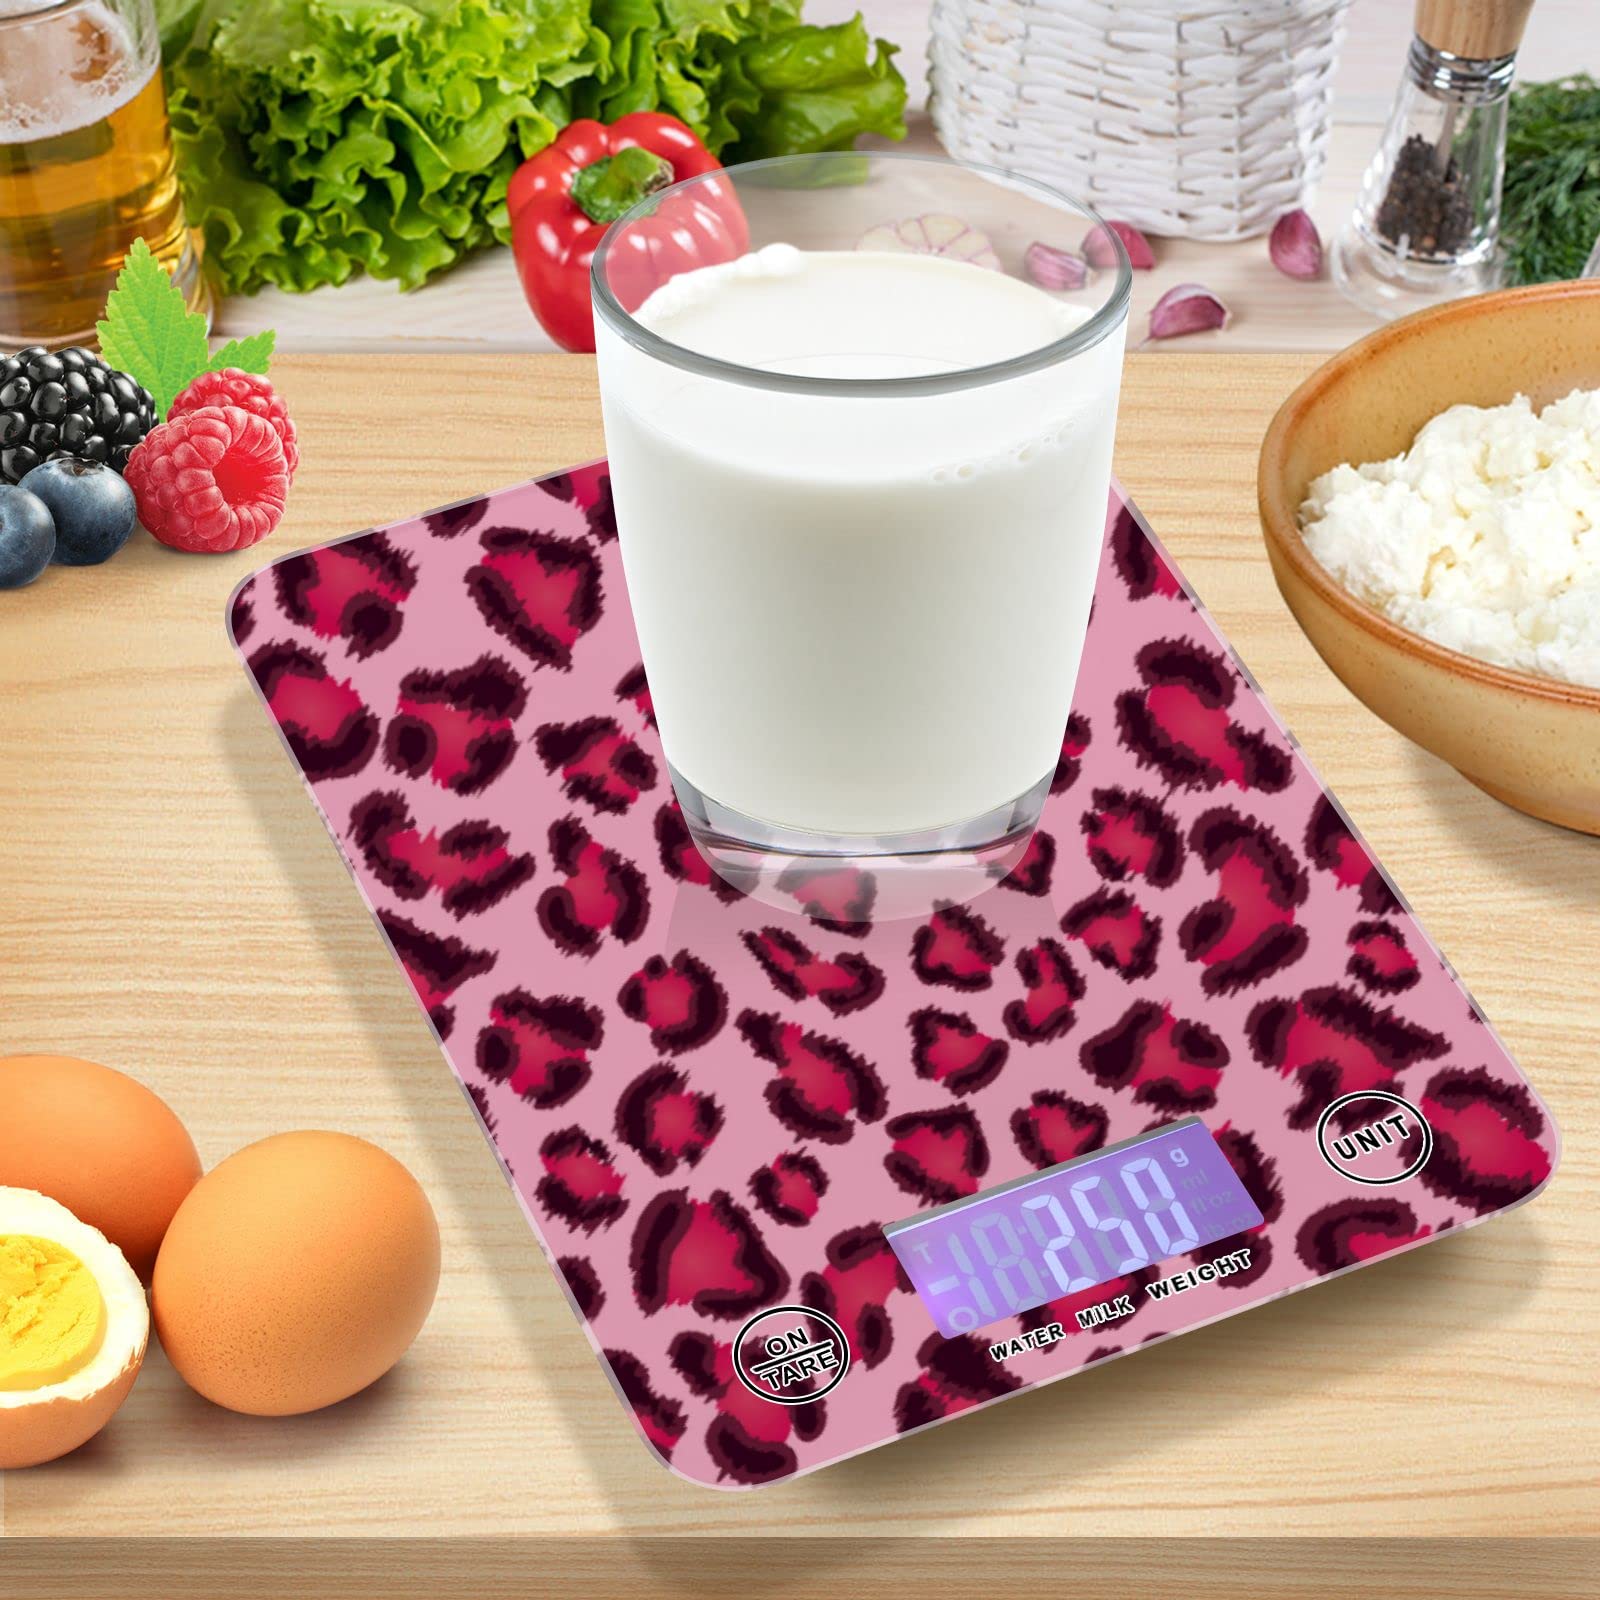 ALAZA Food Scale, Pink Leopard Digital Kitchen Scale for Food Ounces and Grams, 5g/0.18 oz - 5kg/11LB